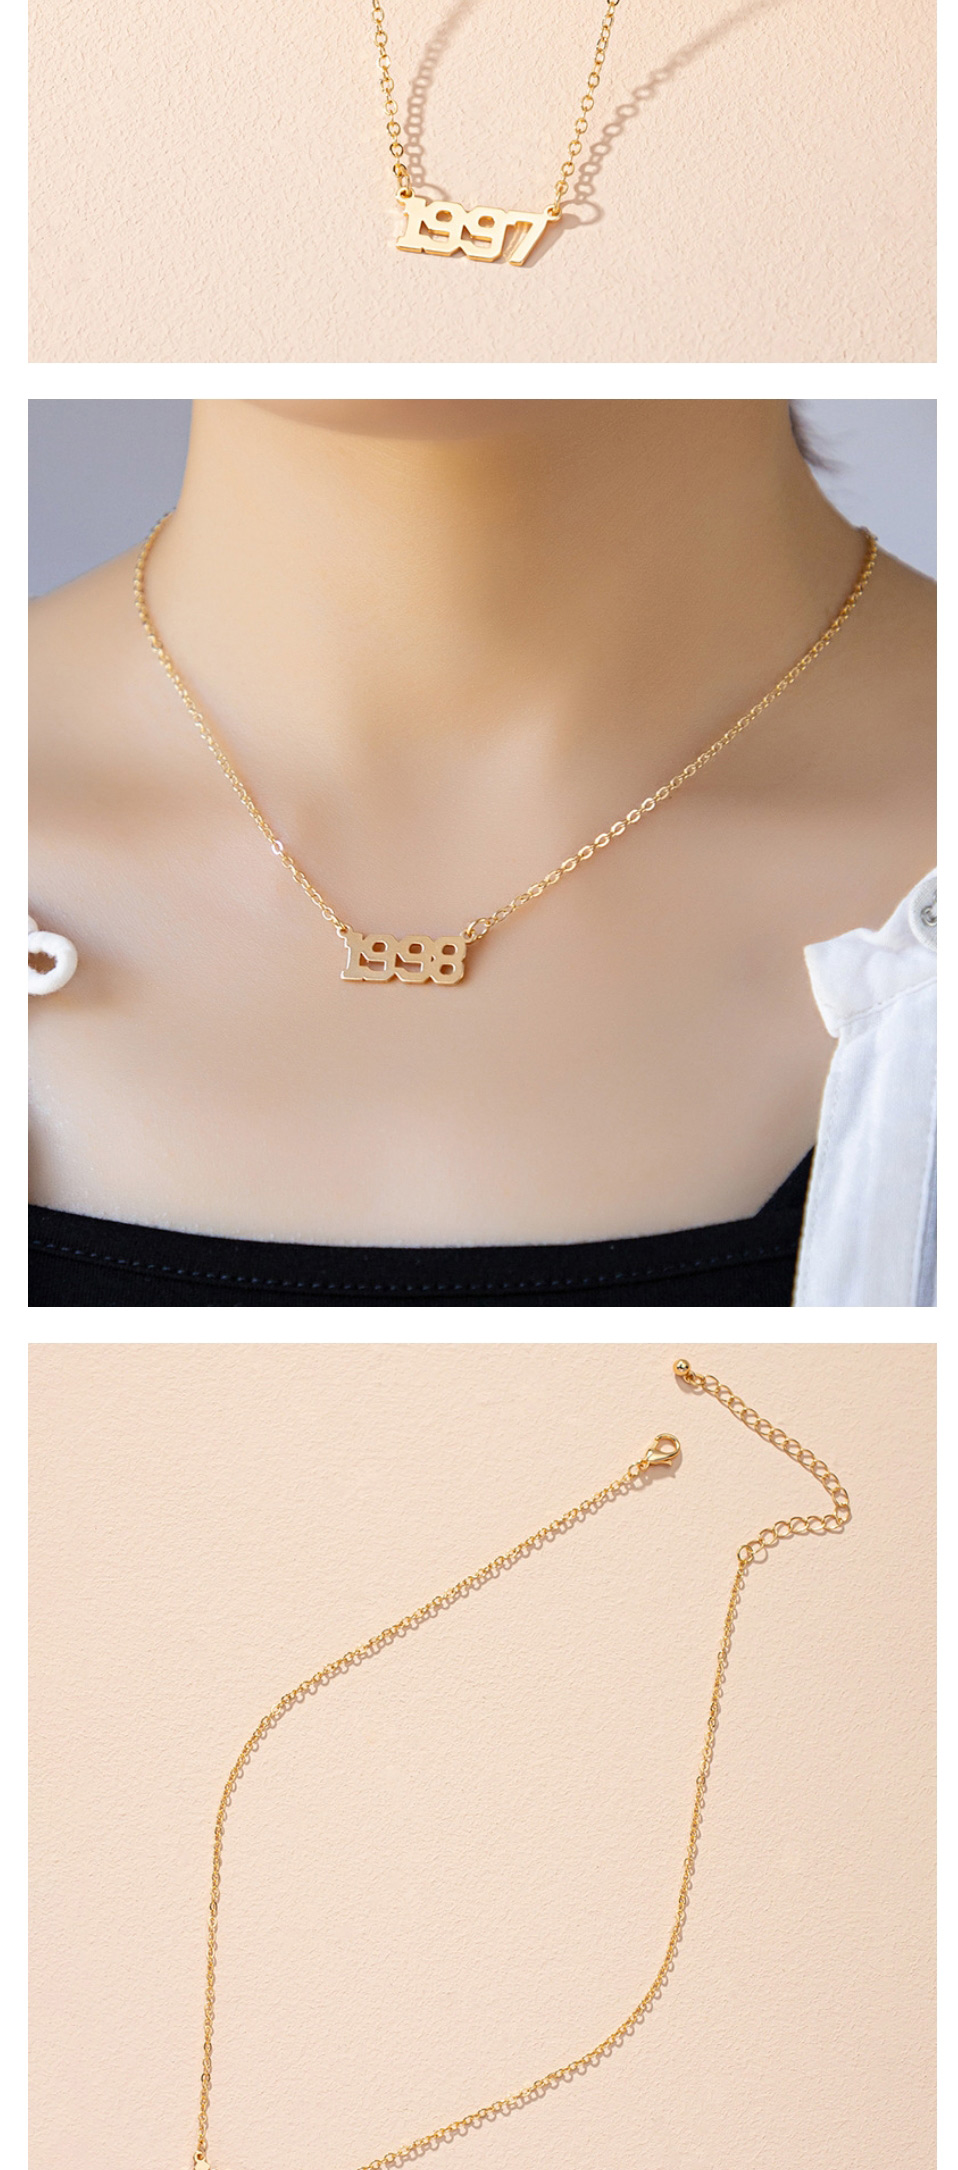 Fashion 1999 Alloy Number Necklace,Pendants